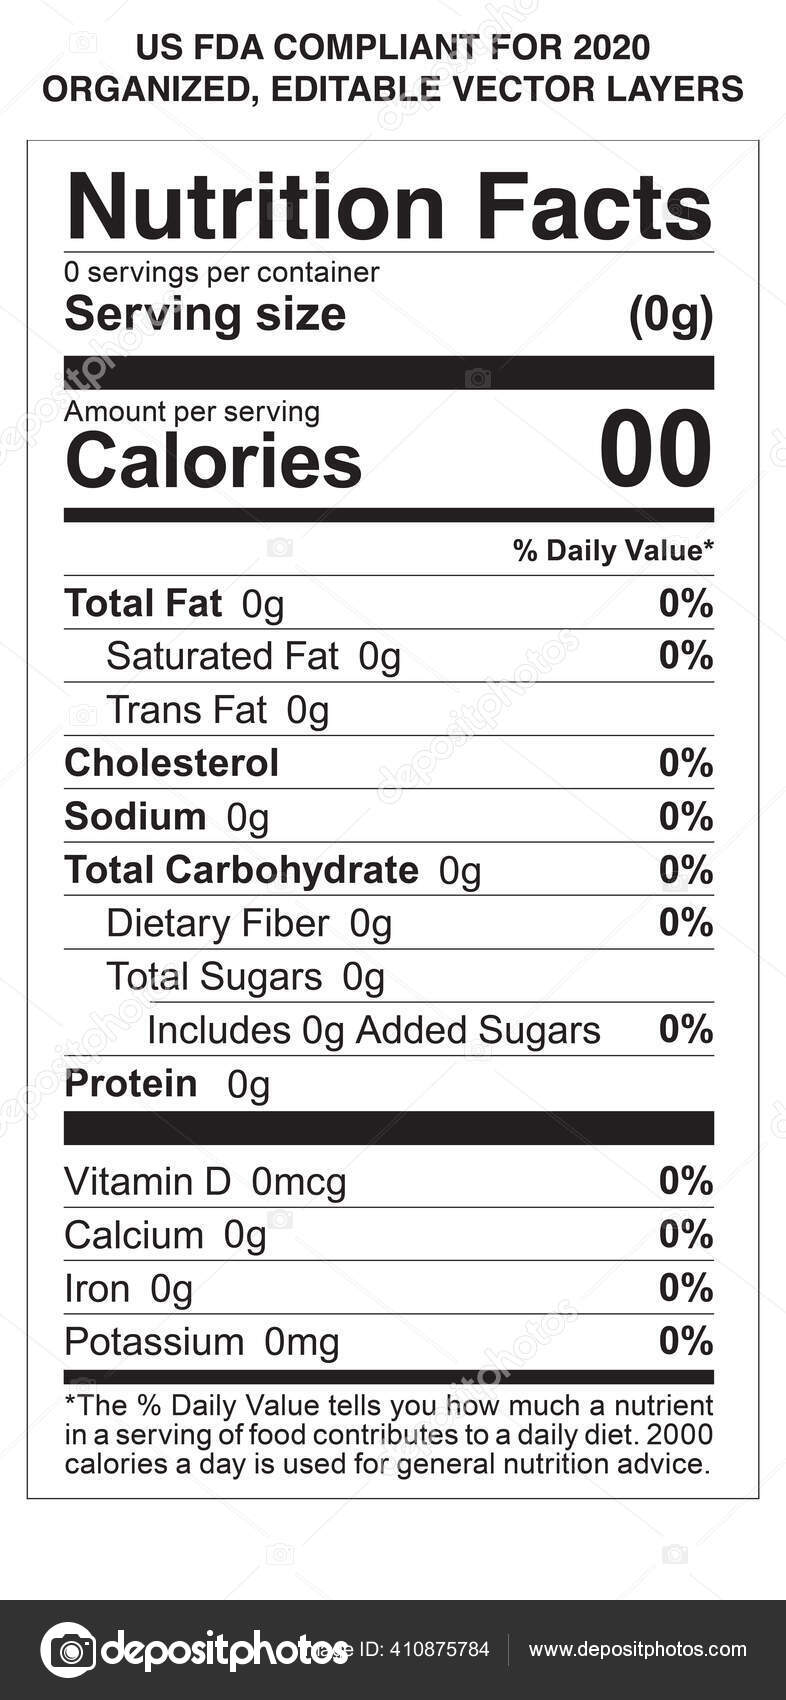 Example nutrition facts label.